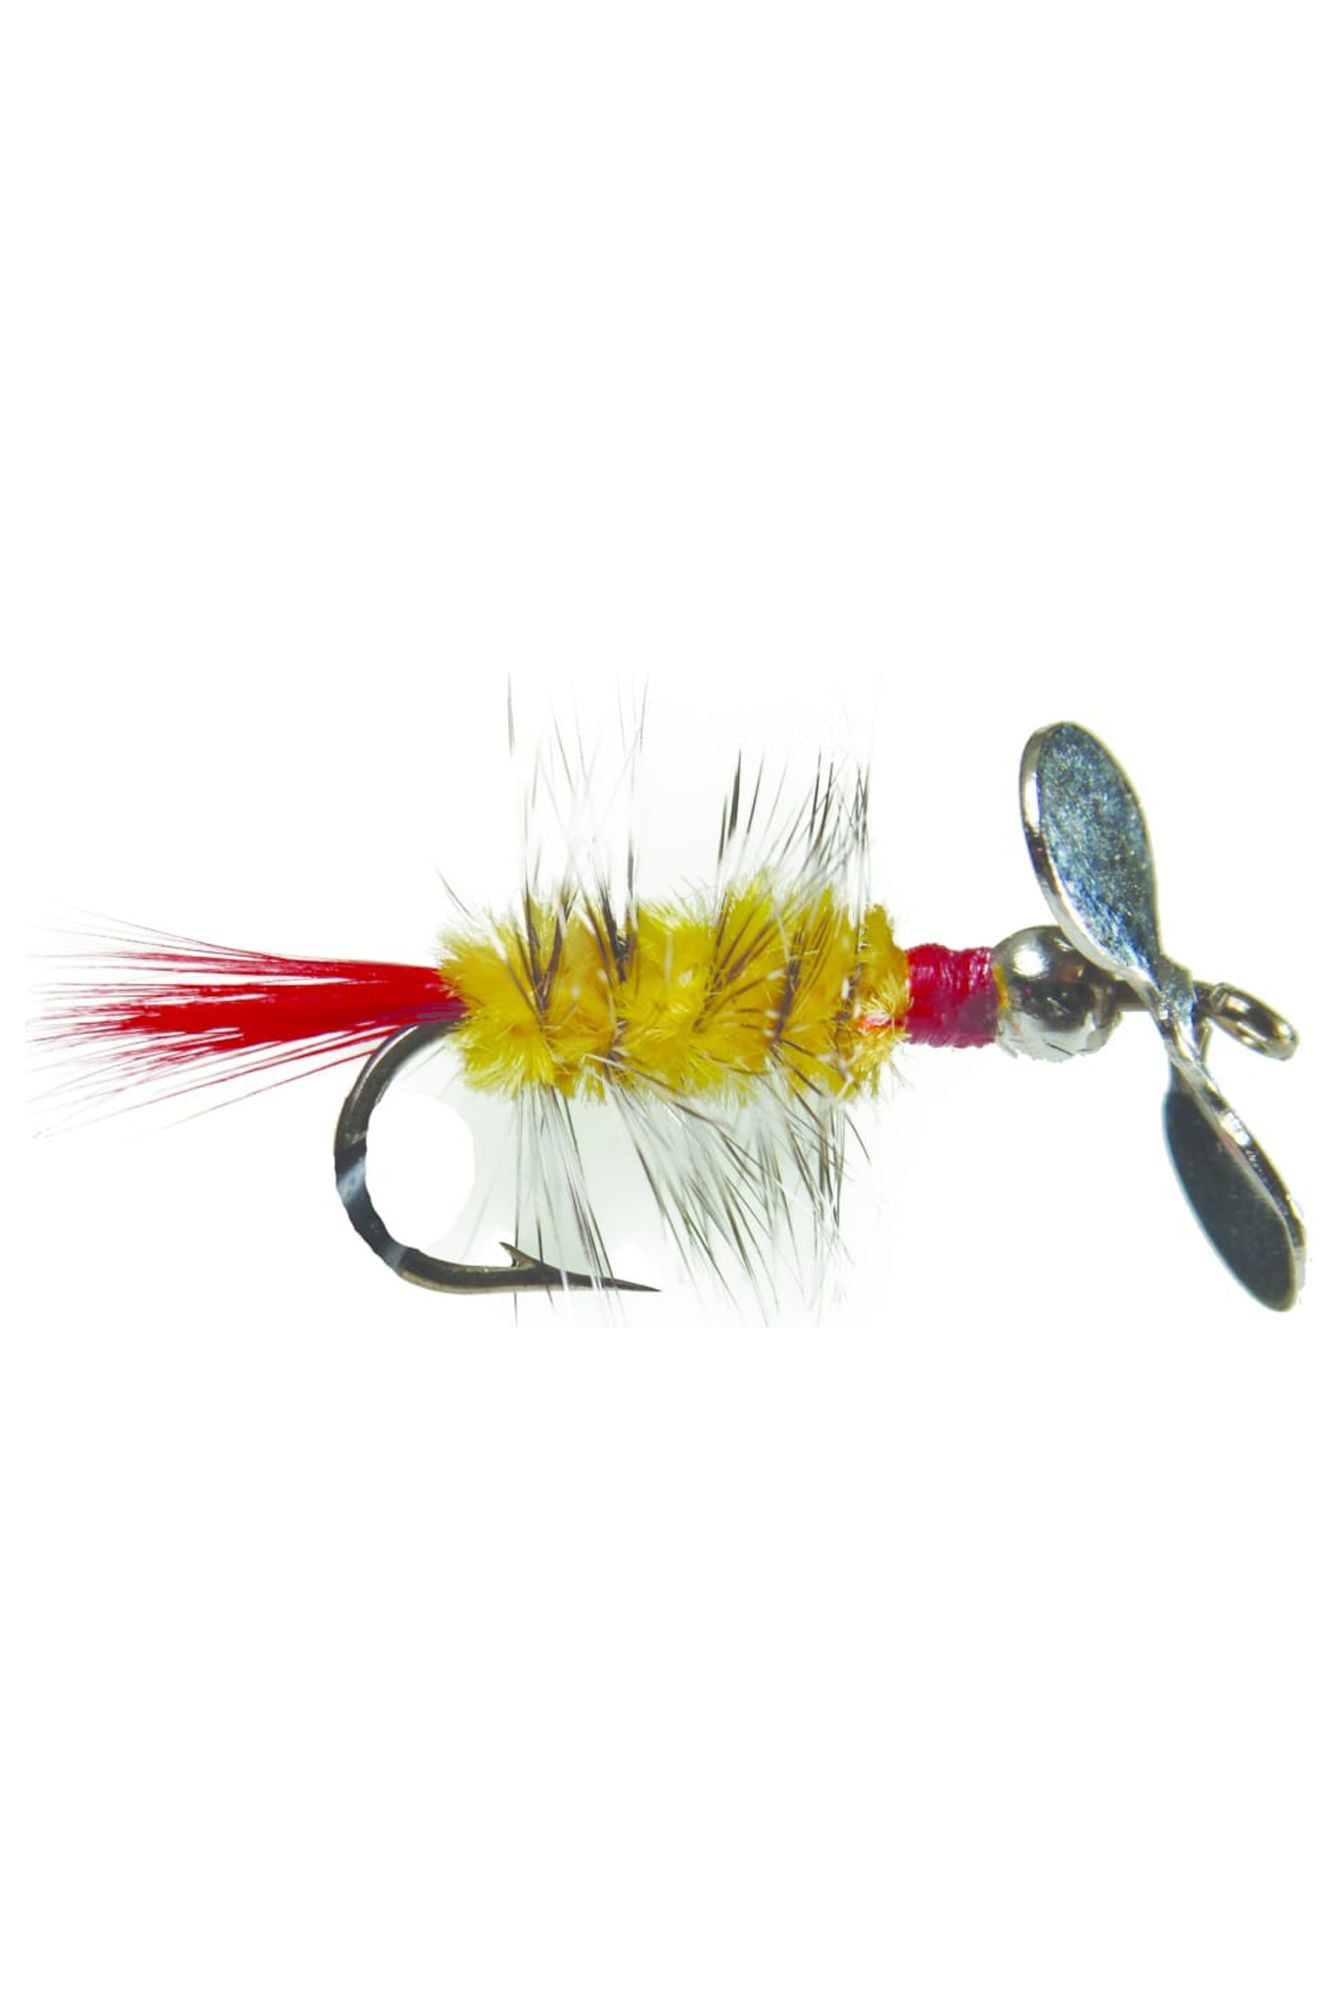 Pistol Pete's Freshwater Fly Fishing Lure for Trout & Panfish, Size 10